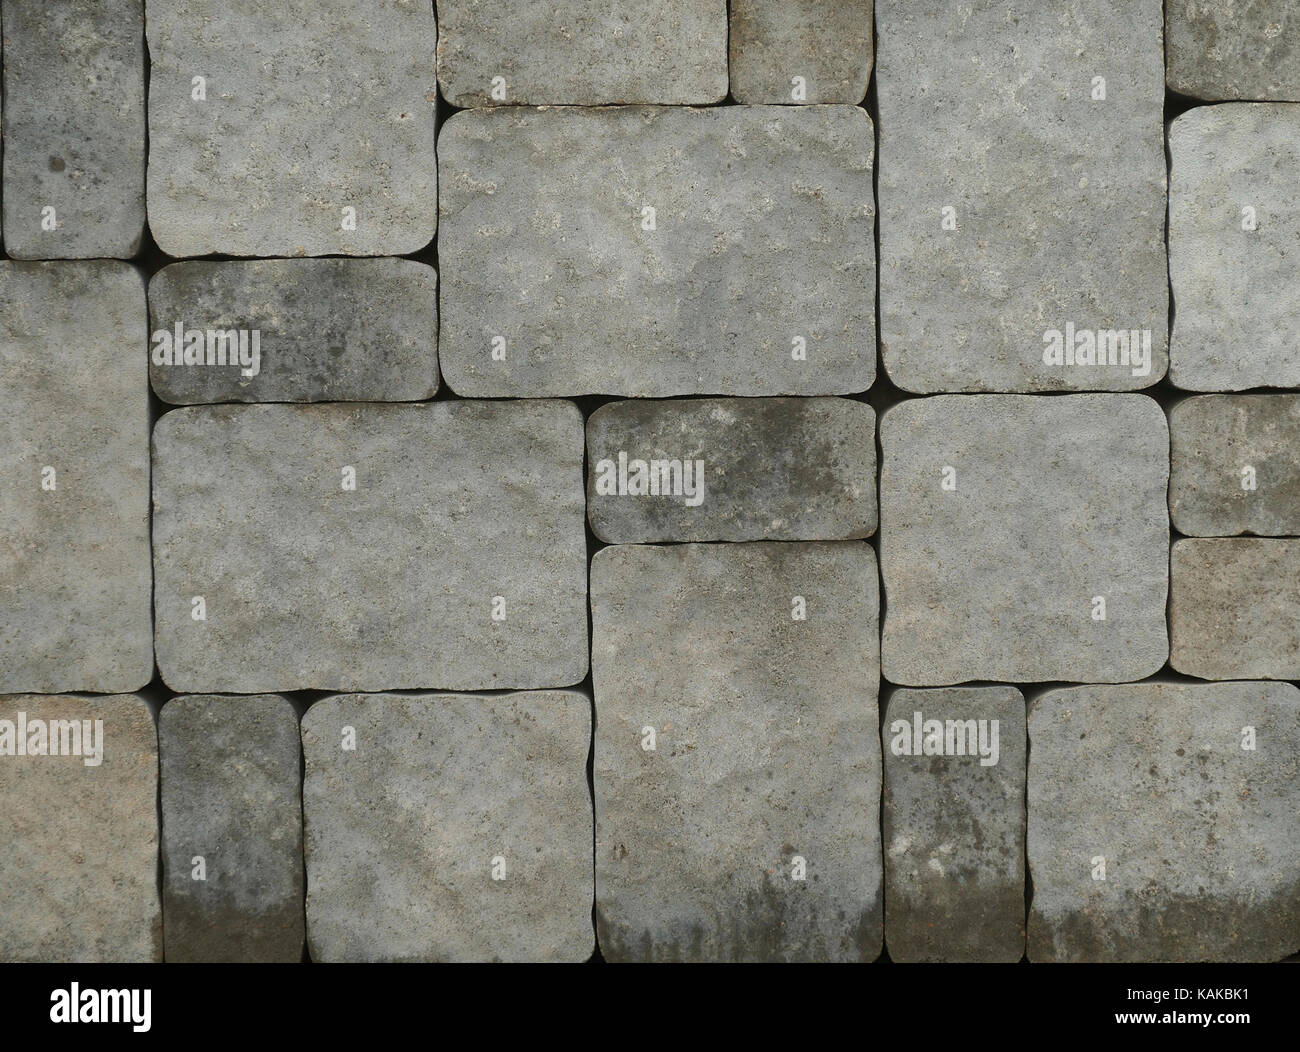 Abstract natural stone masonry, wall made on rock stone, textured background Stock Photo